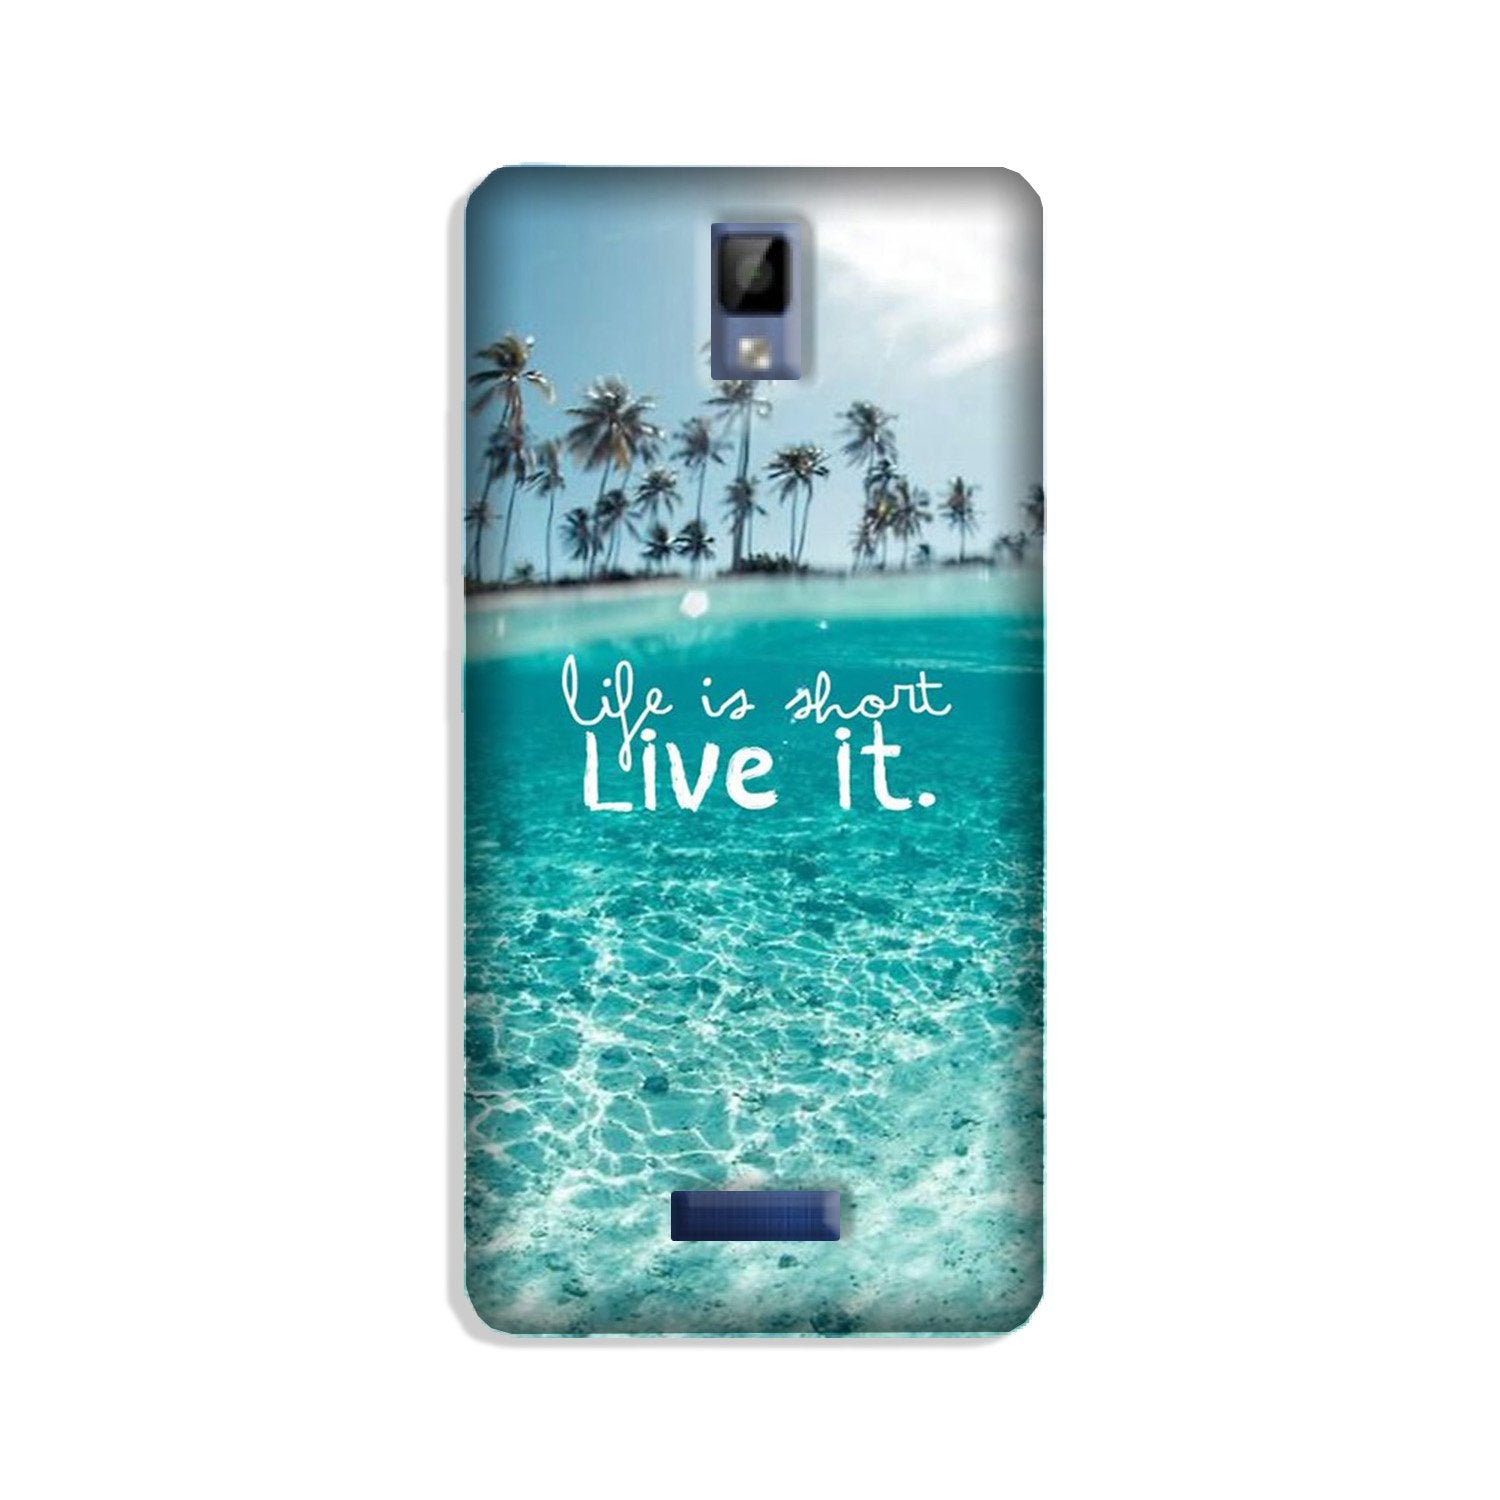 Life is short live it Case for Gionee P7